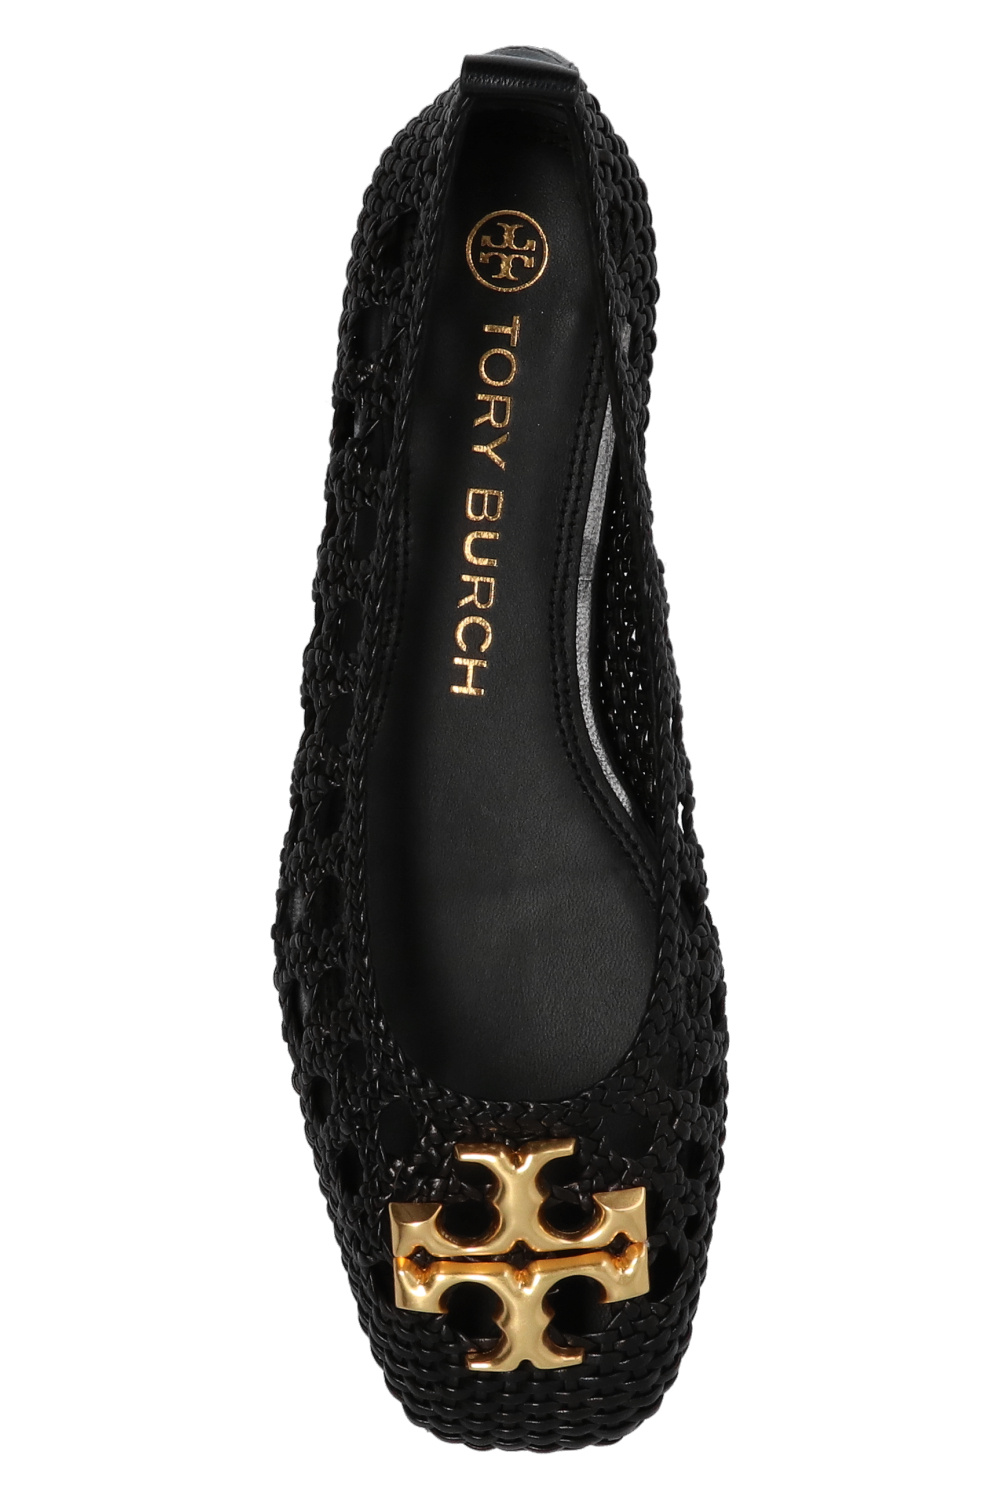 Tory Burch Woven Flats France, SAVE 44% 